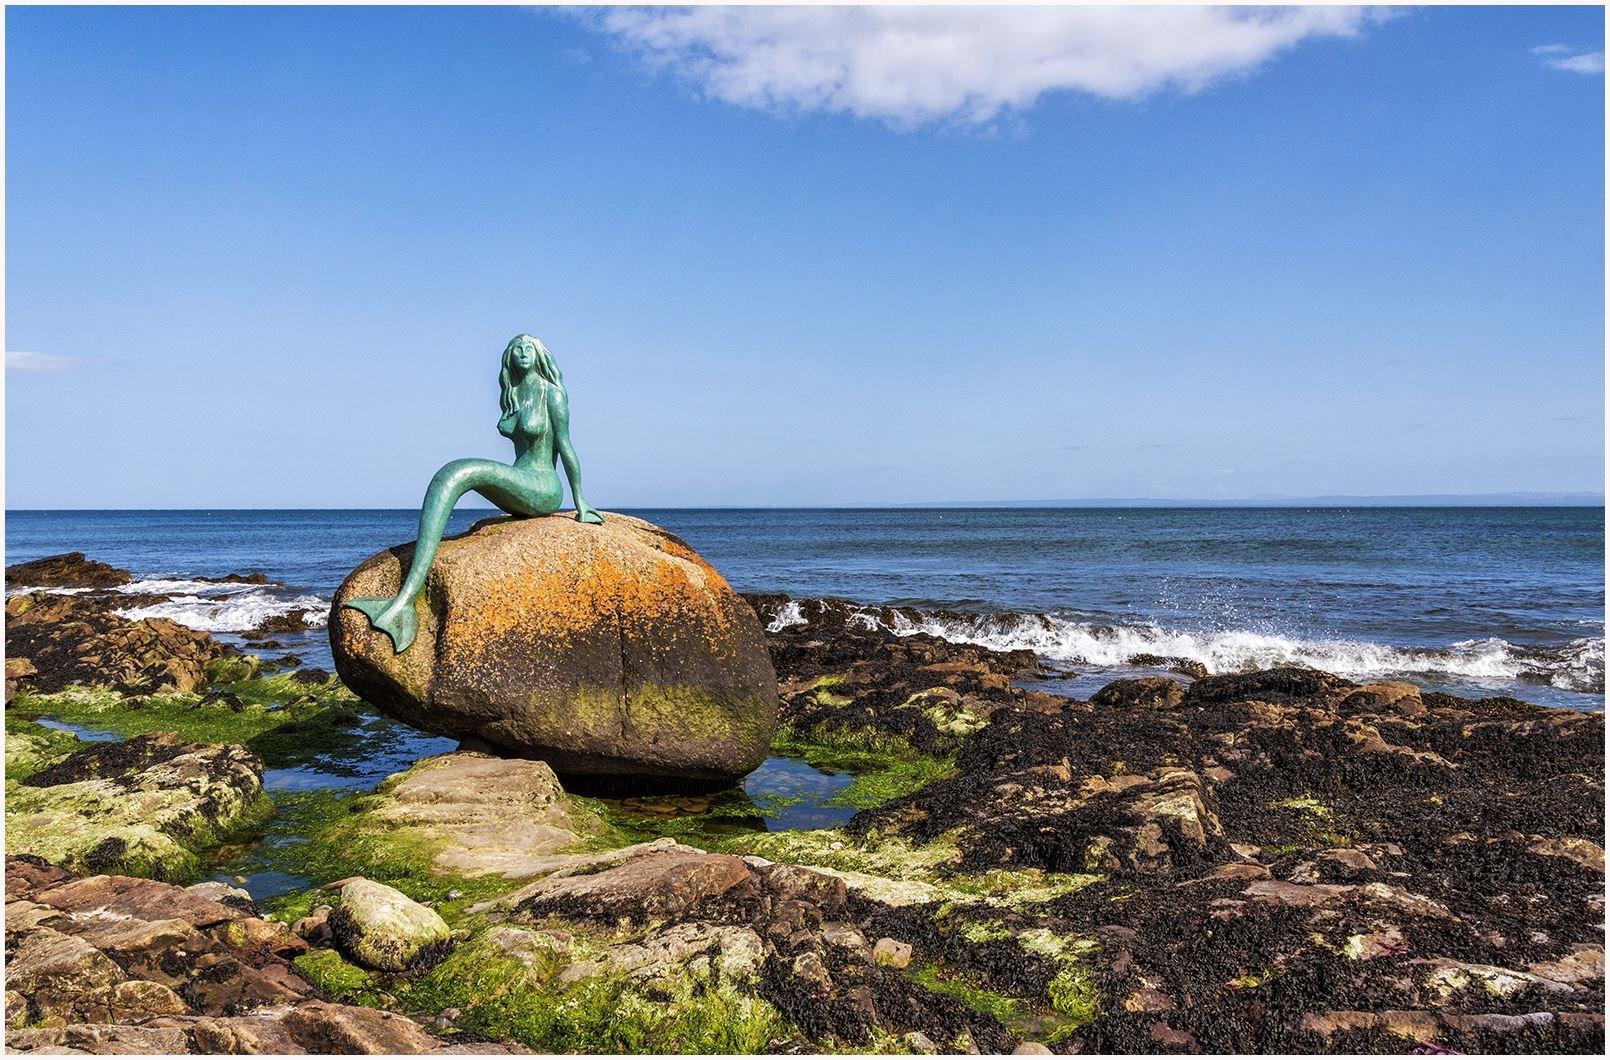 Linda Ross encountered Balintore's Mermaid of the North on a beautiful day.